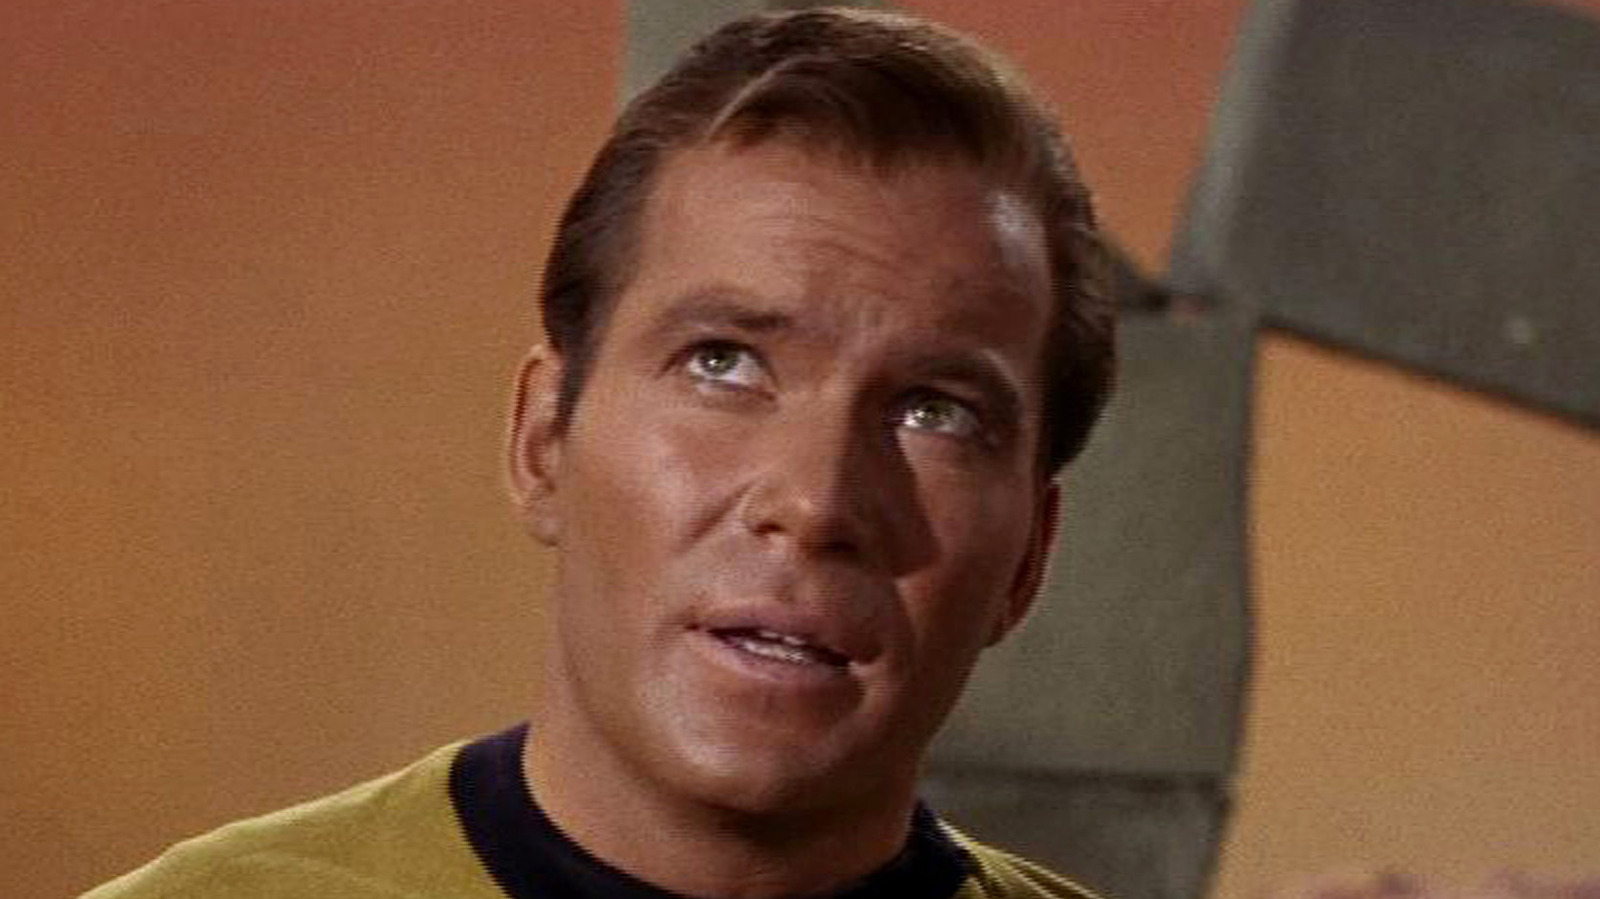 Gene Roddenberry Biopic Release Date And Story - What We Know So Far